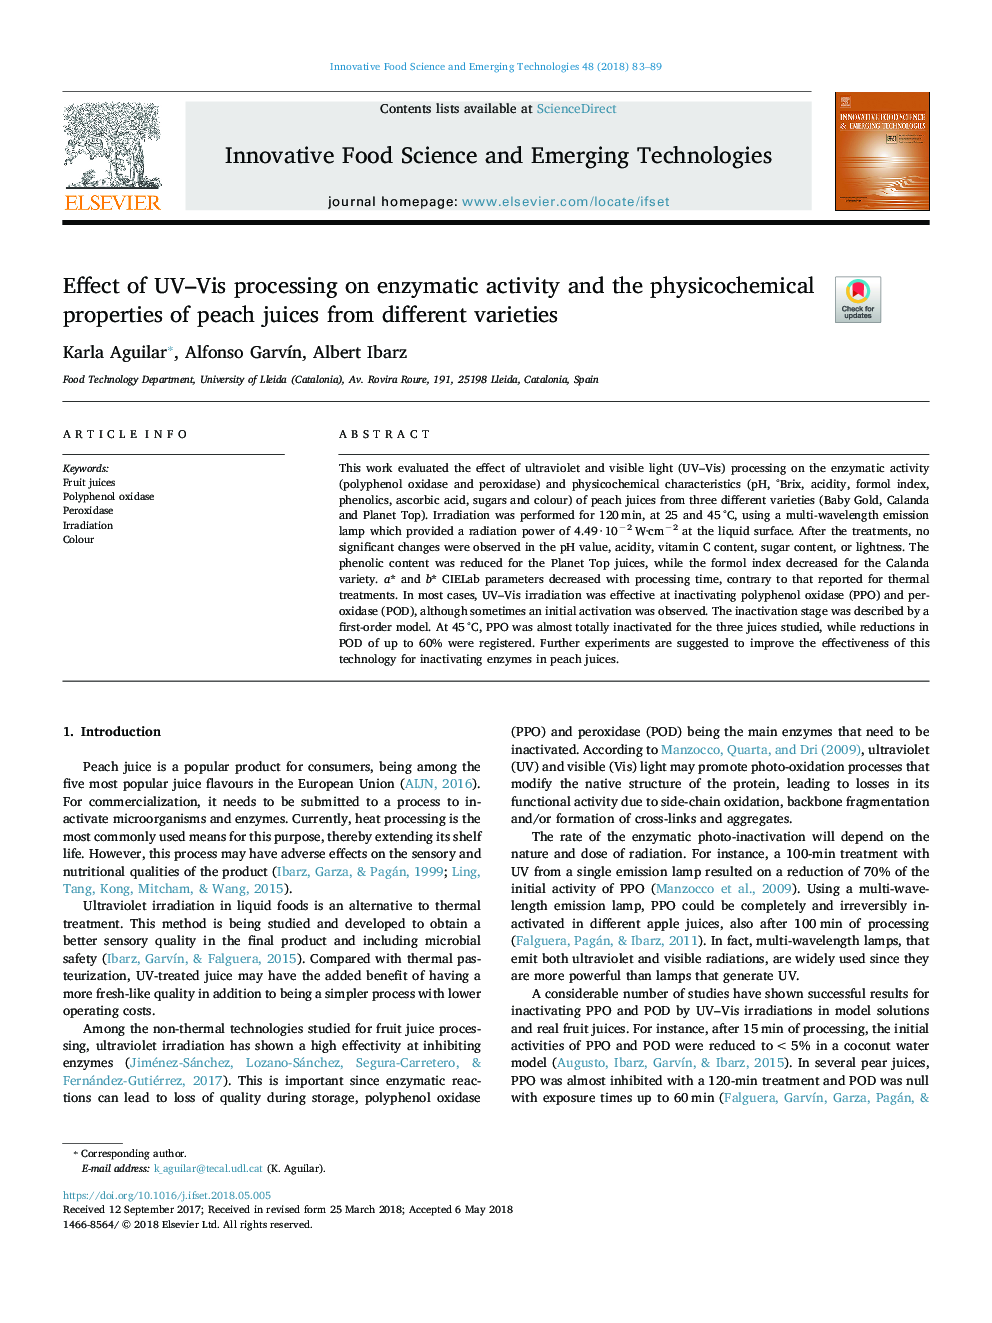 Effect of UV-Vis processing on enzymatic activity and the physicochemical properties of peach juices from different varieties